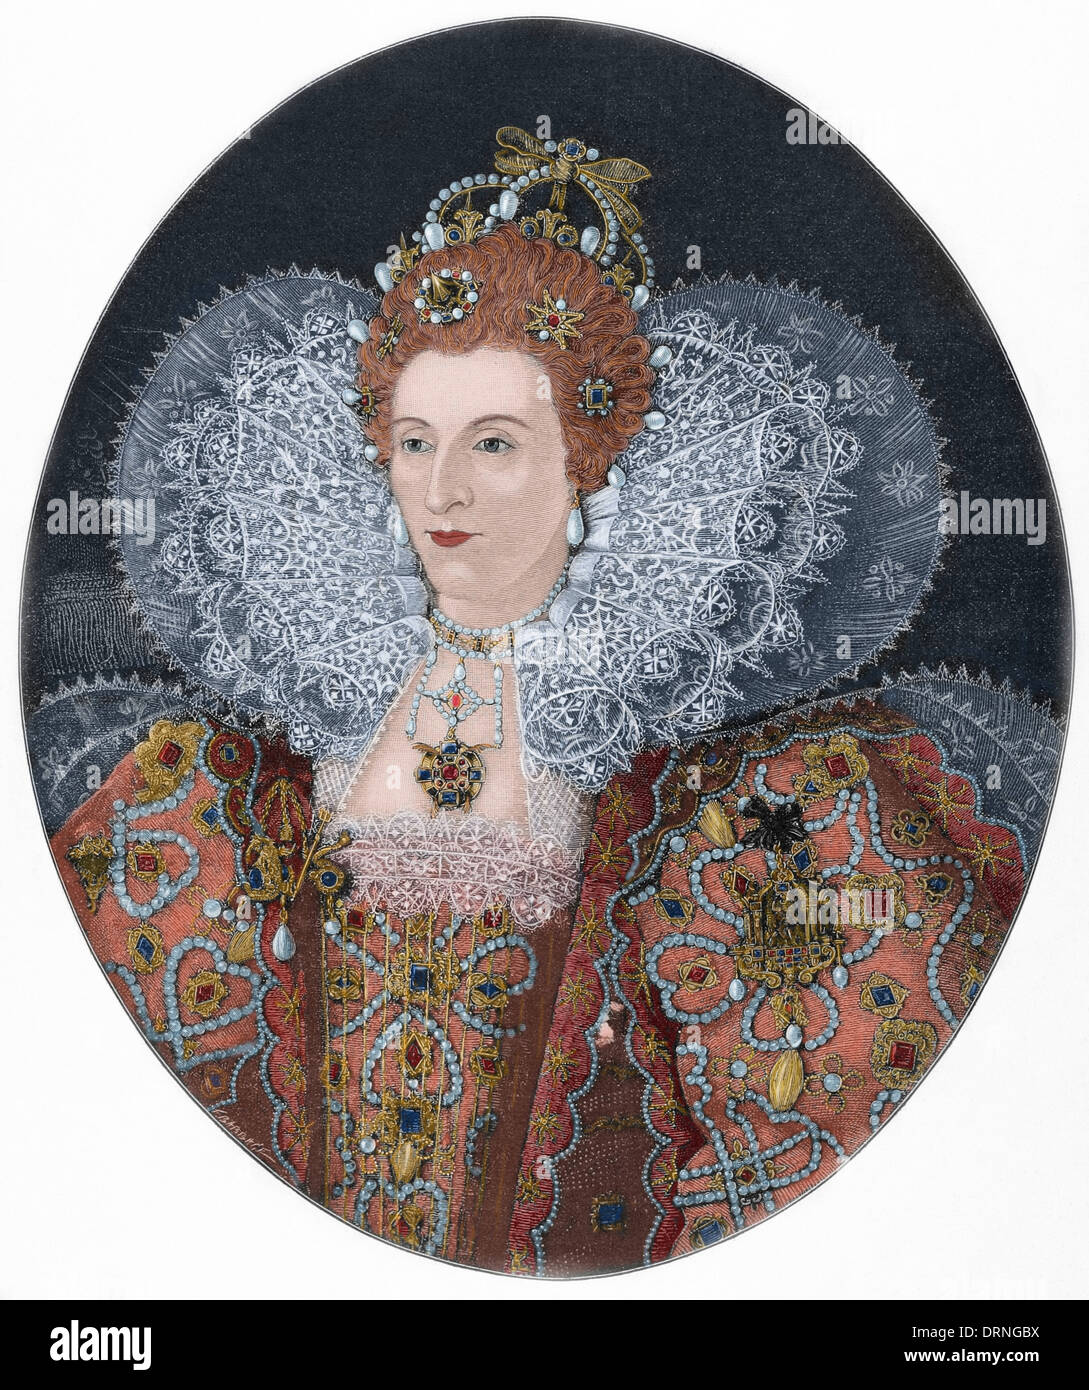 Elizabeth I (1533-1603). Queen of England and Ireland. Engraving by F ...